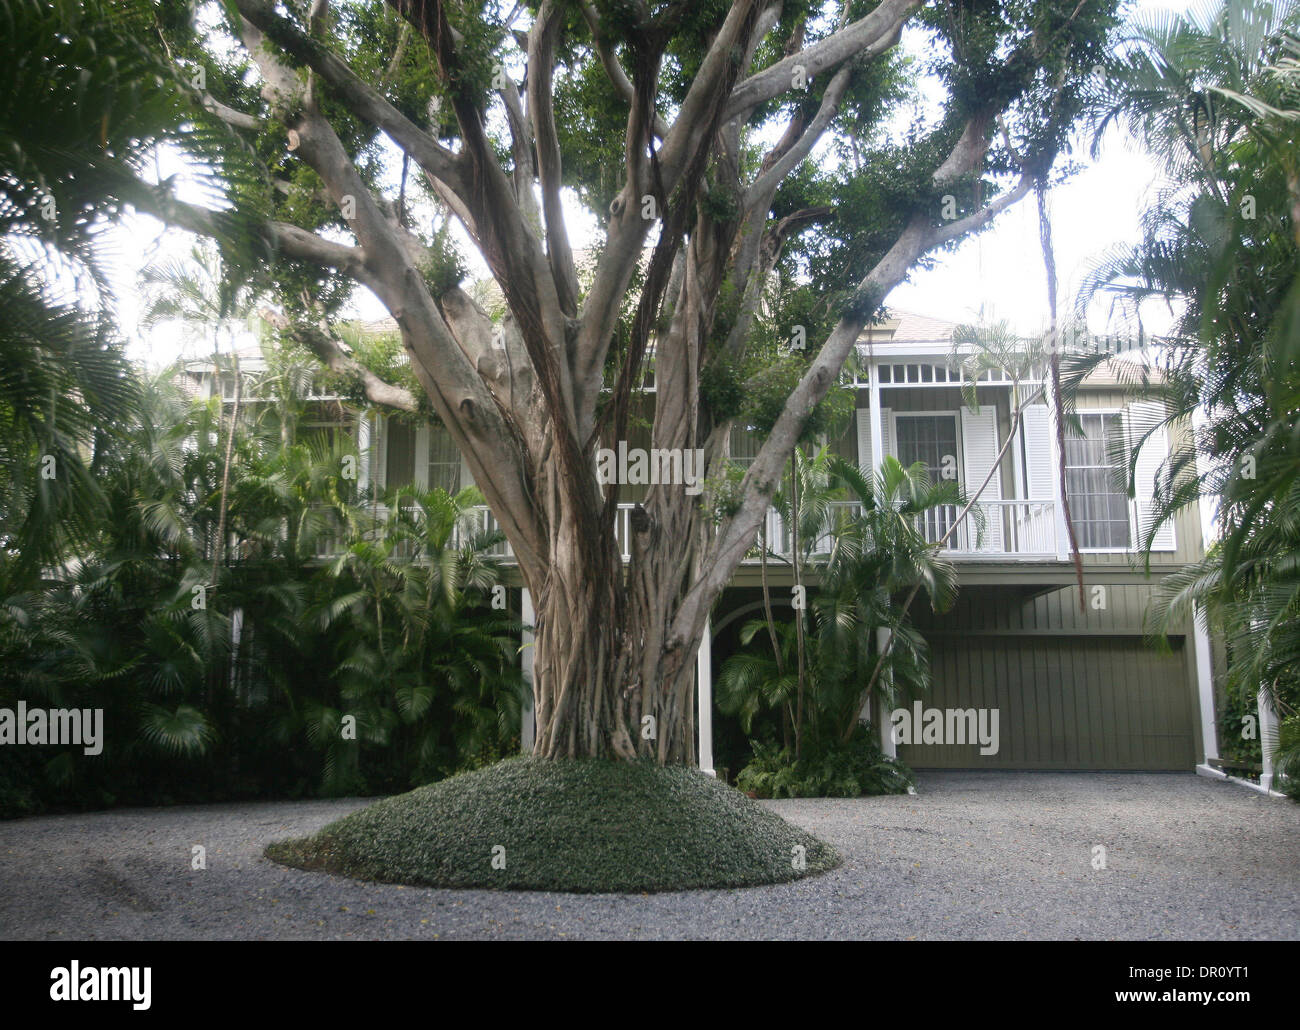 Dec 29, 2008 - West Palm Beach, Florida, USA  - House owned by Bernard Madoff and his wife Ruth at 410 N. Lake Way in Palm Beach, Florida.  A valuable statue was stolen from its yard facing the Intracoastal Waterway over the weekend.   (Credit Image: © Taylor Jones/Palm Beach Post/ZUMA Press) RESTRICTIONS: * USA Tabloids Rights OUT * Stock Photo